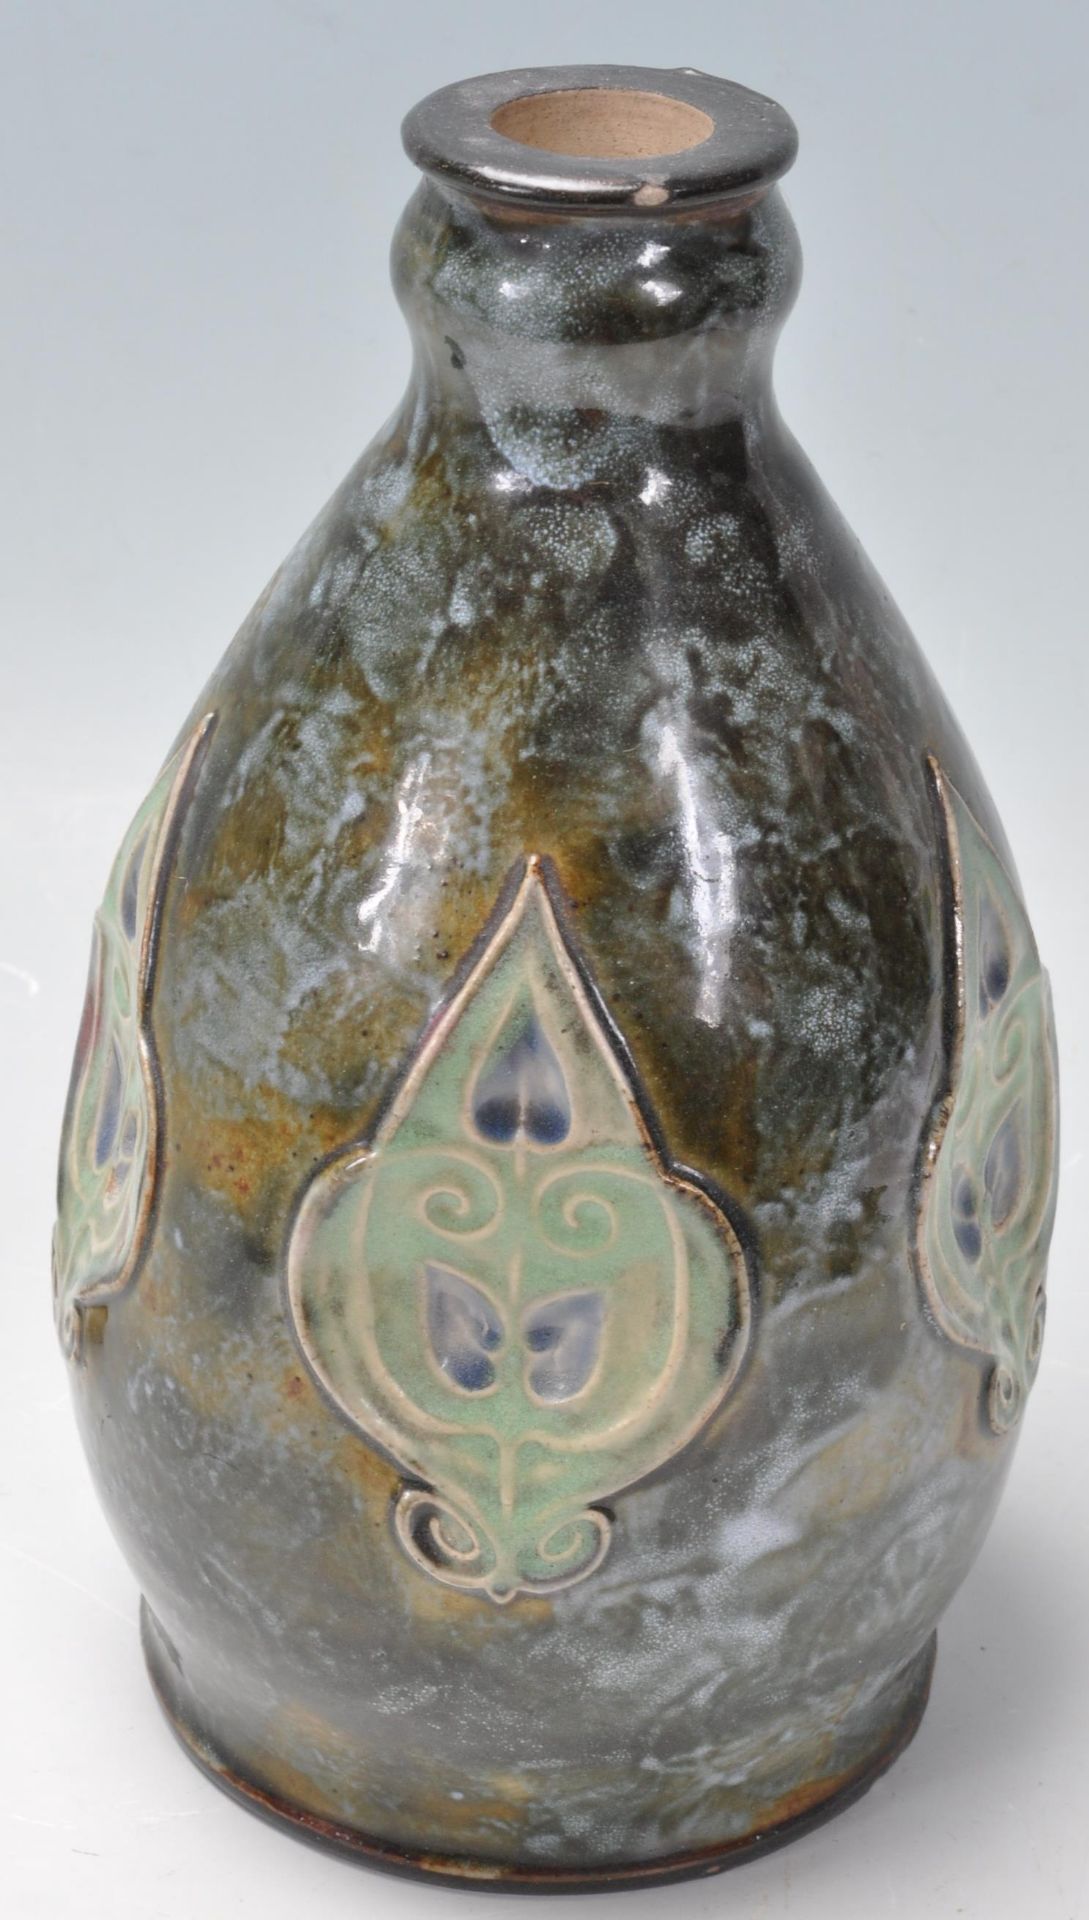 ROYAL DOULTON BOTTLE JUG WITH STOPPER - Image 5 of 7